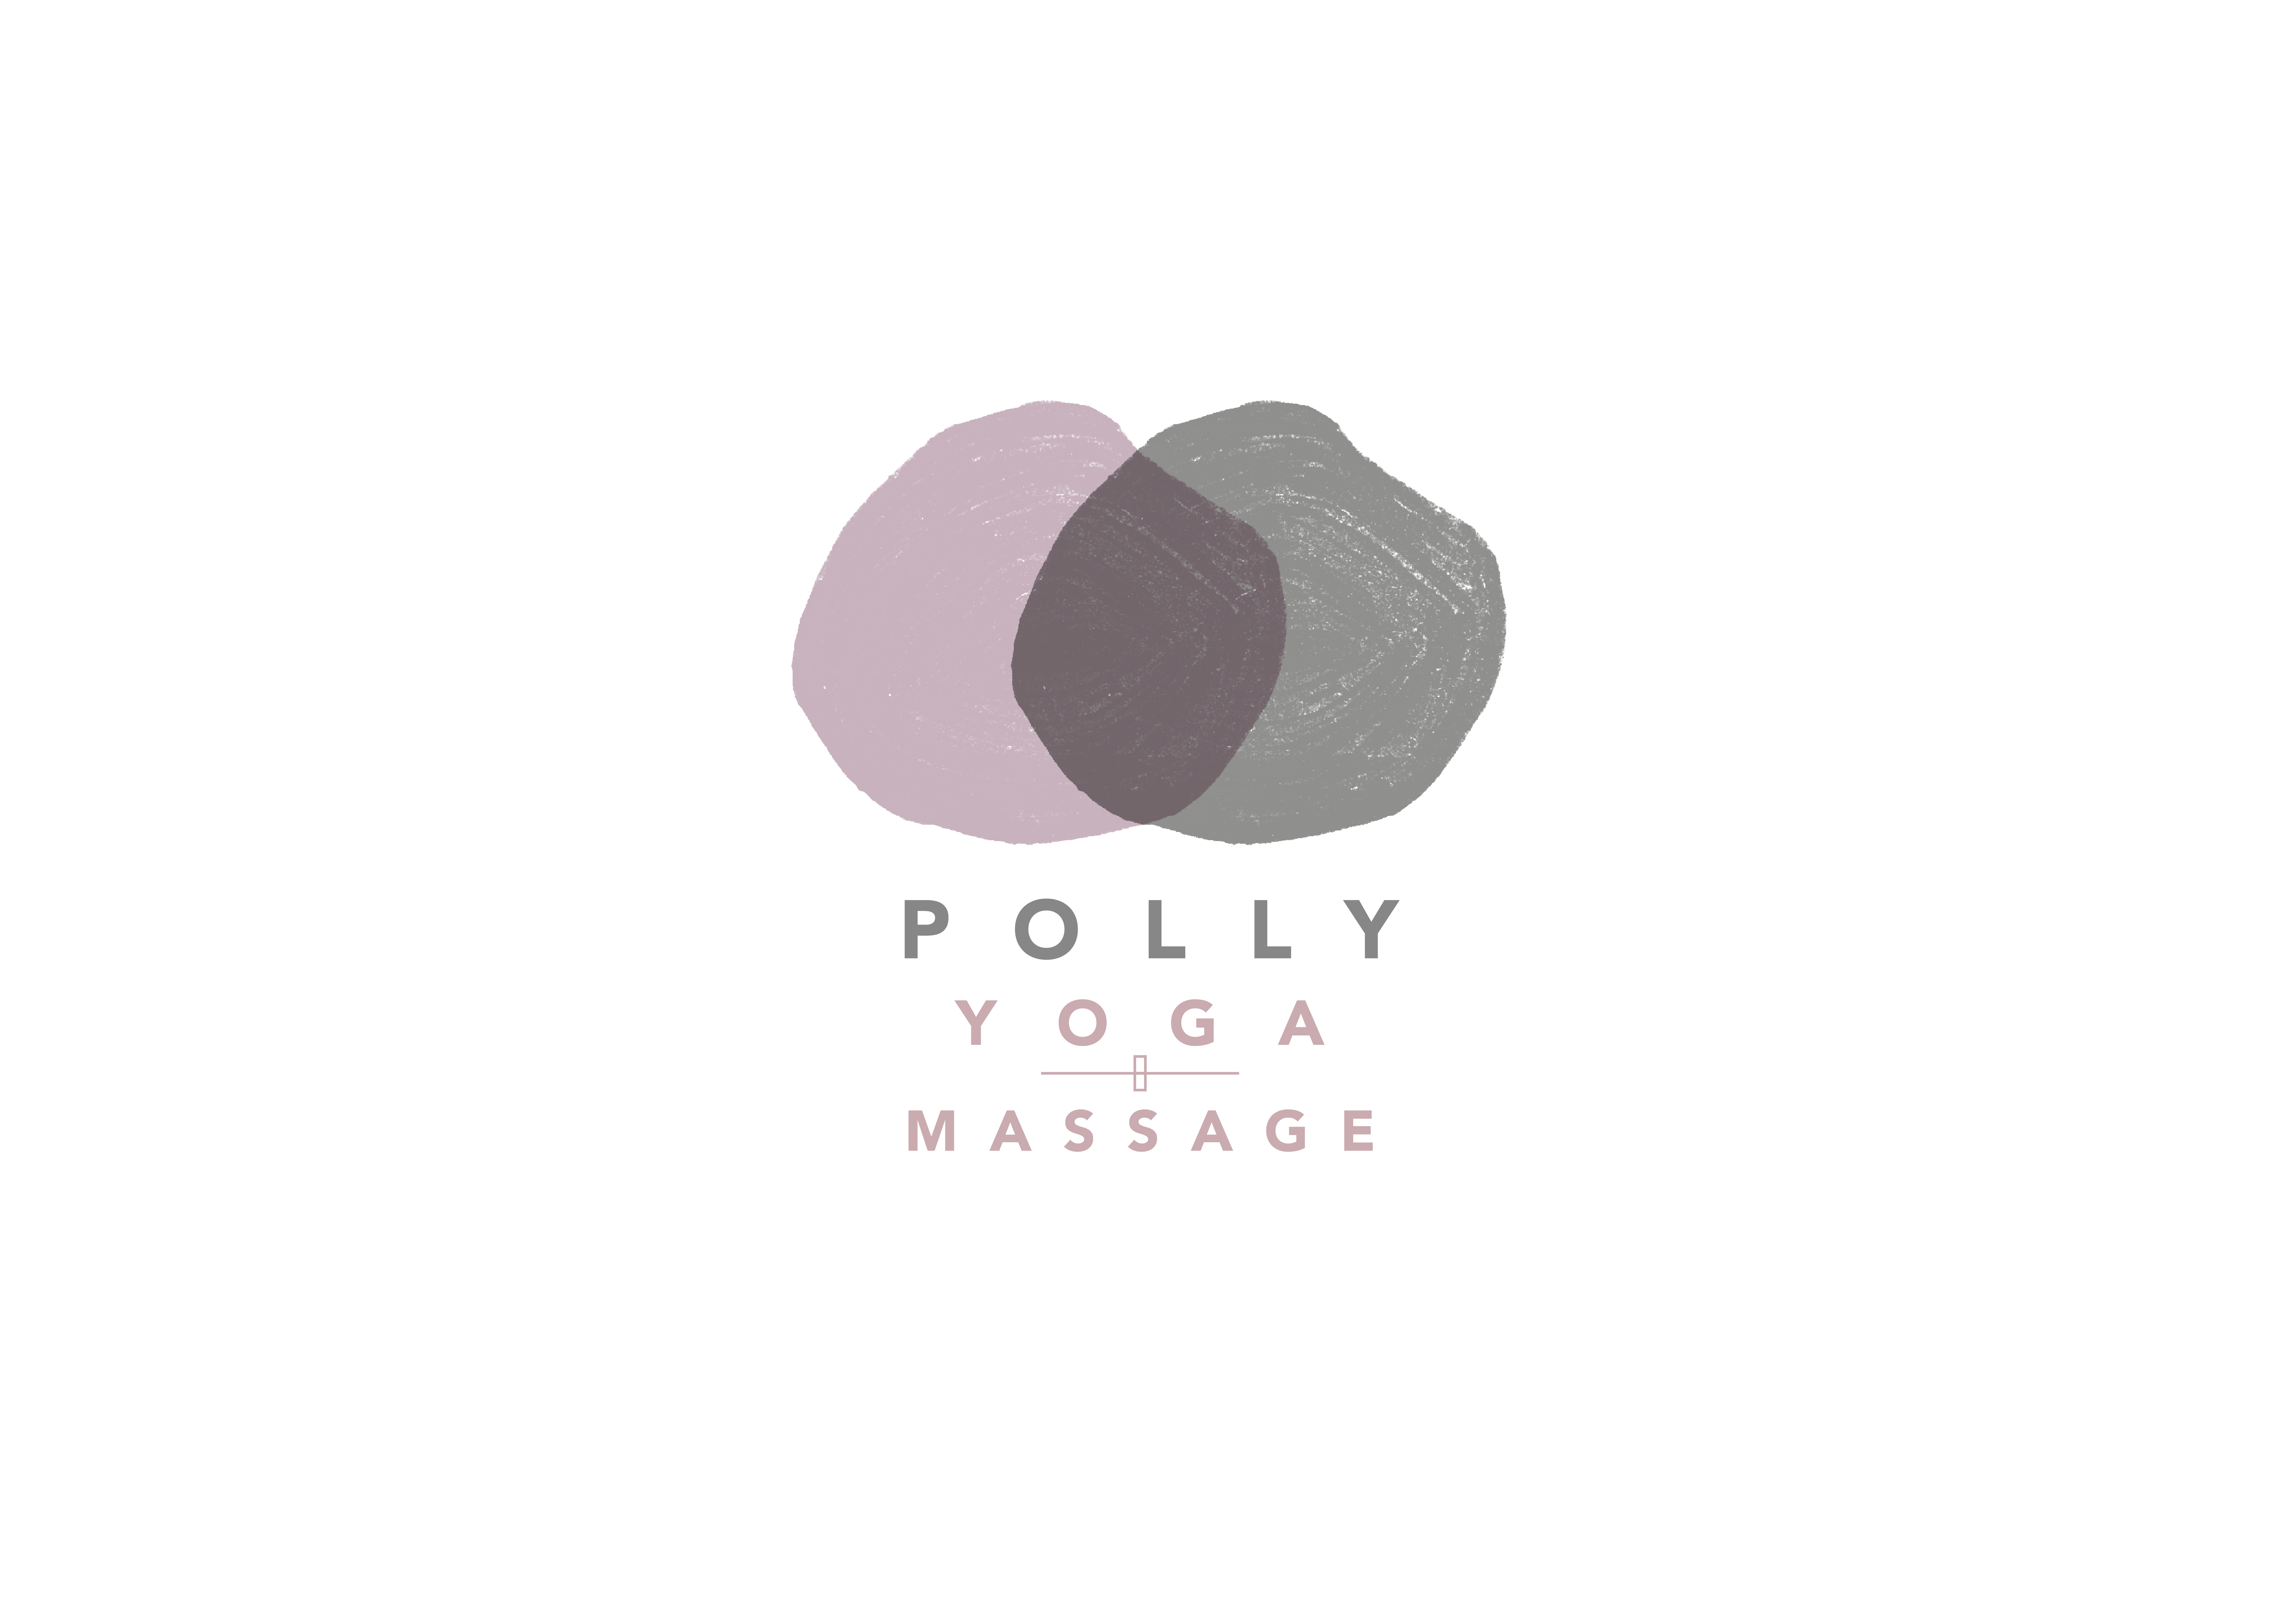 Polly Yoga And Massage Polly Fowler Manchester Uk